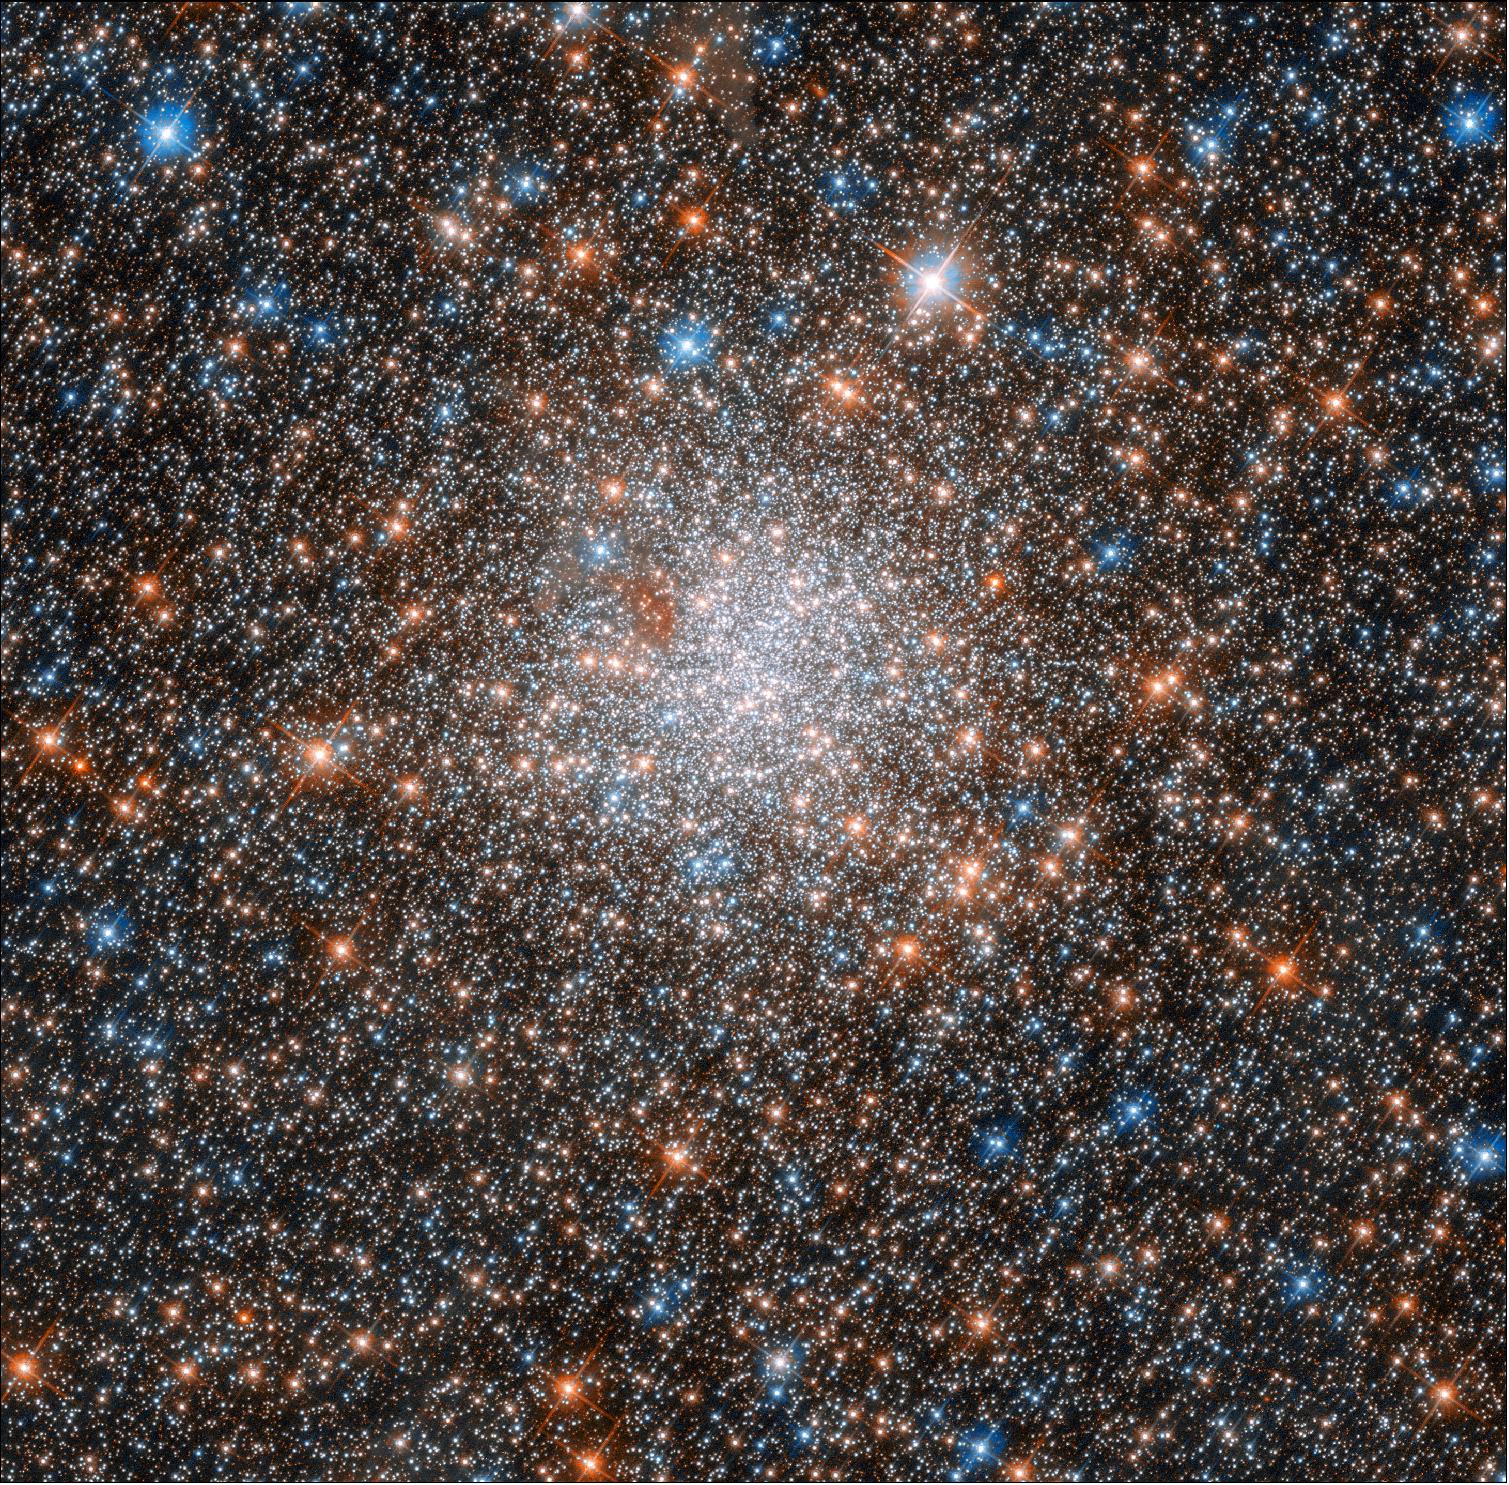 Figure 14: This glittering ball of stars is the globular cluster NGC 1898, which lies toward the center of the Large Magellanic Cloud — one of our closest cosmic neighbors. The Large Magellanic Cloud is a dwarf galaxy that hosts an extremely rich population of star clusters, making it an ideal laboratory for investigating star formation (image credit: ESA/Hubble & NASA)